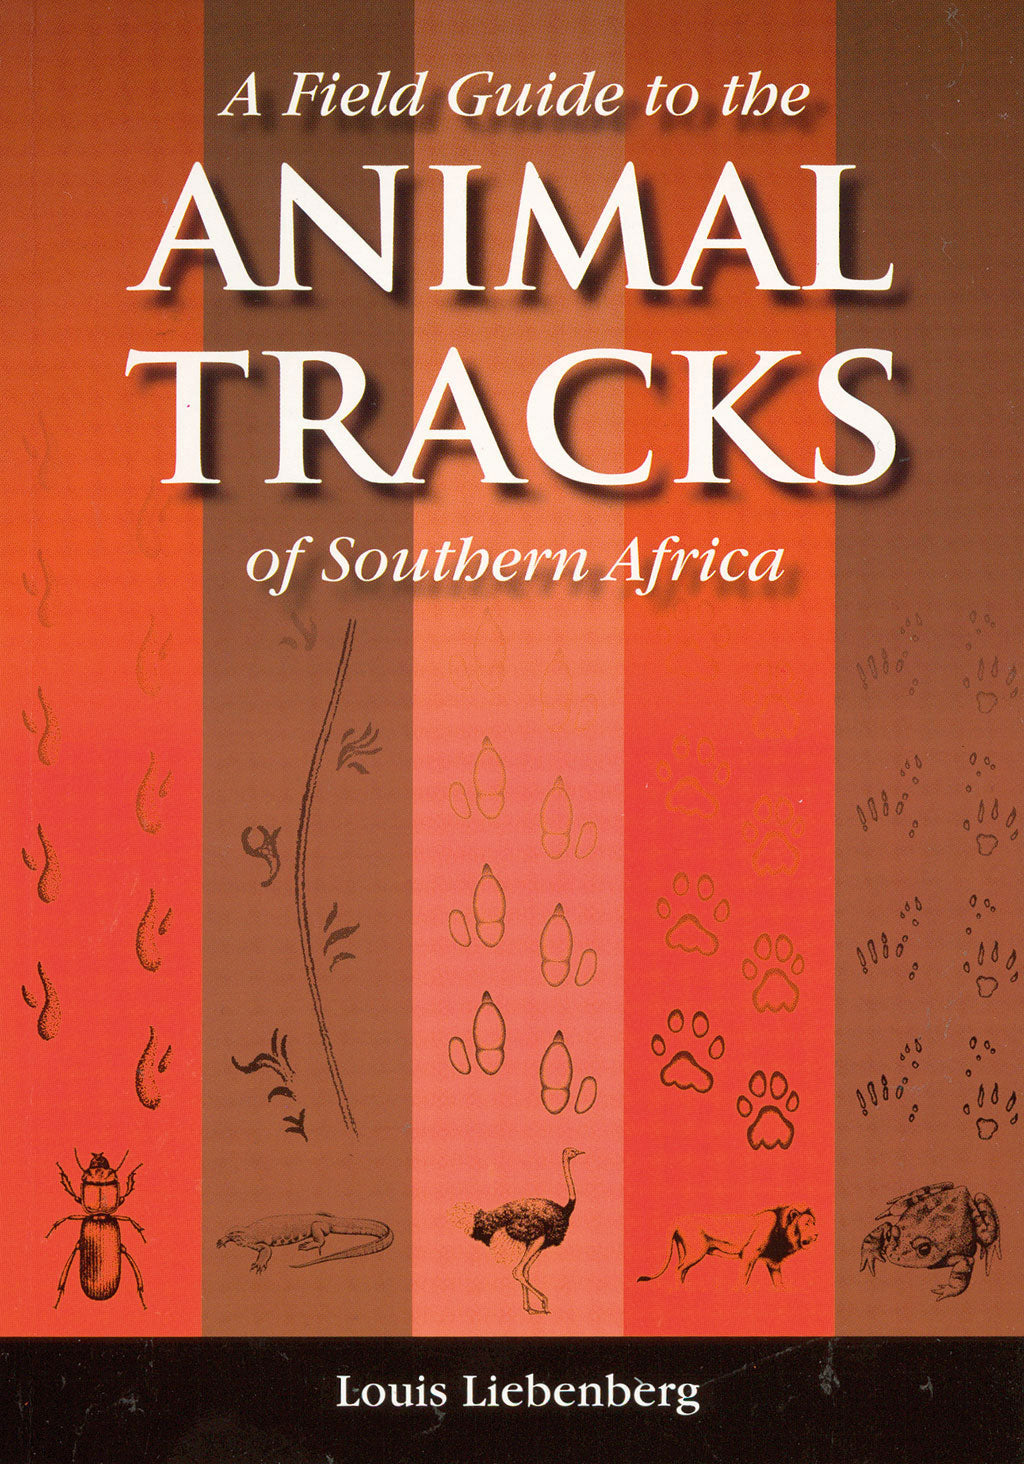 A FIELD GUIDE TO THE ANIMAL TRACKS OF SOUTHERN AFRICA